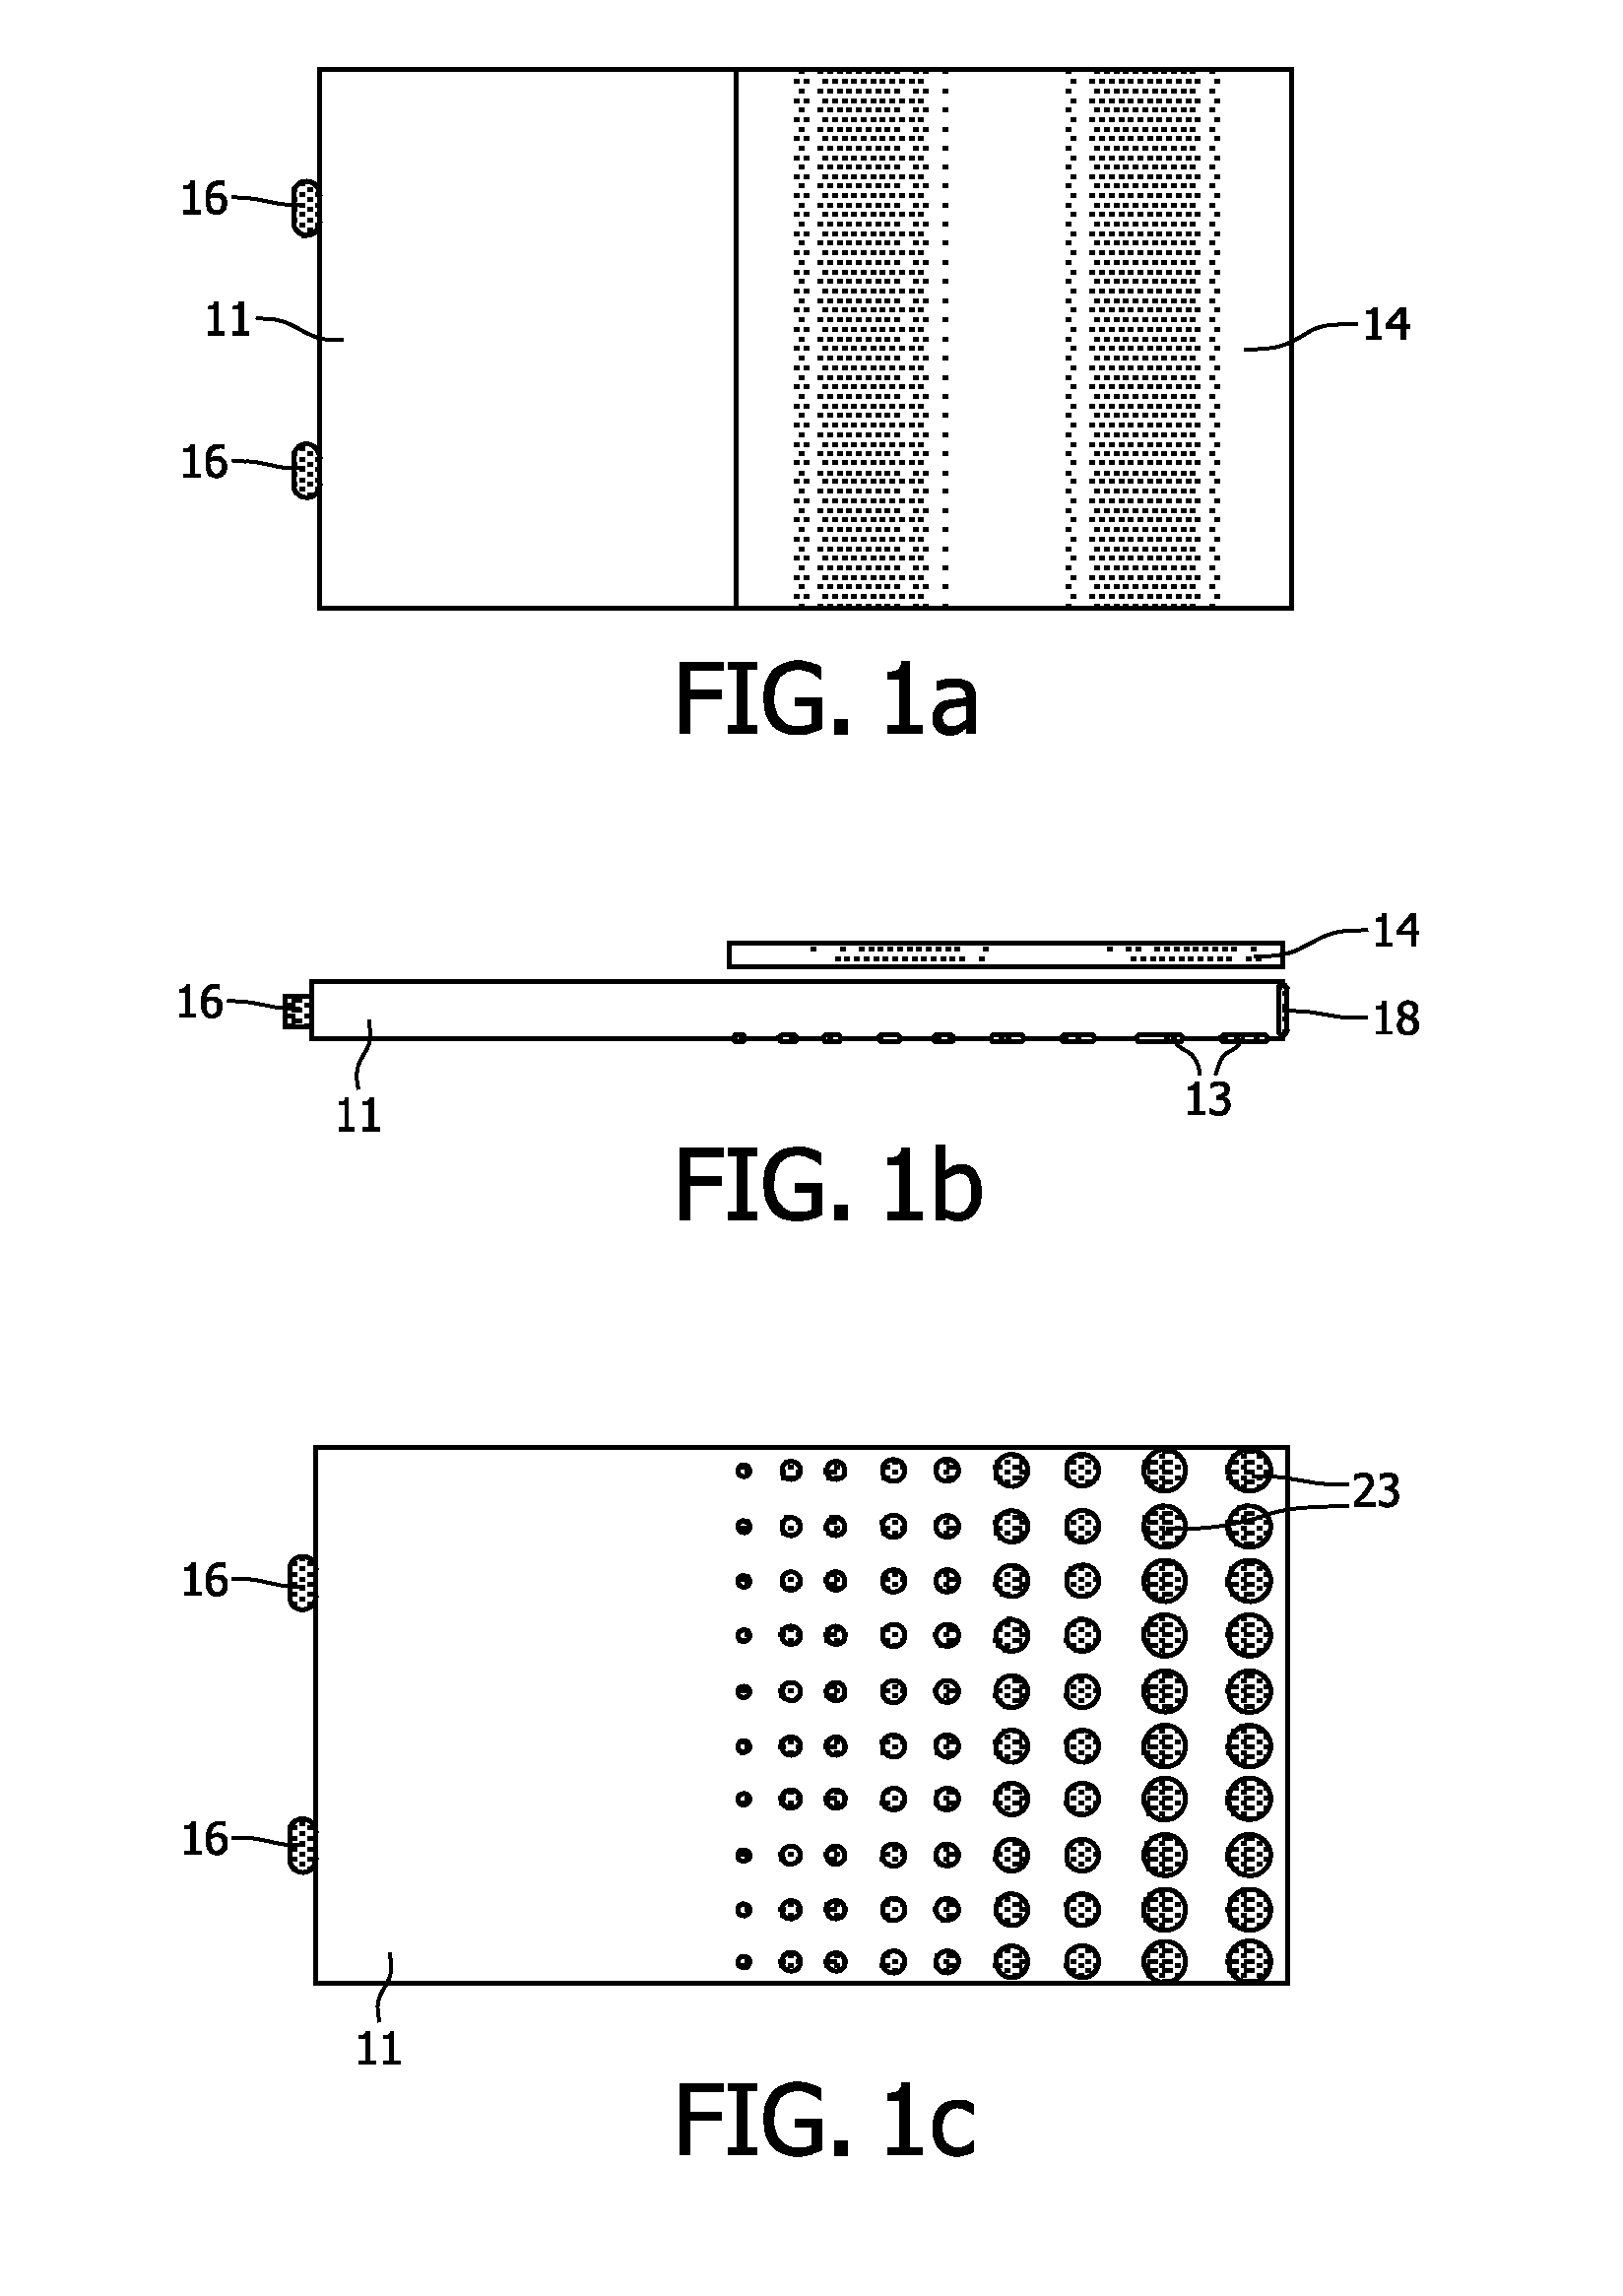 Light guide system, and reflector for controlling out-coupling of light